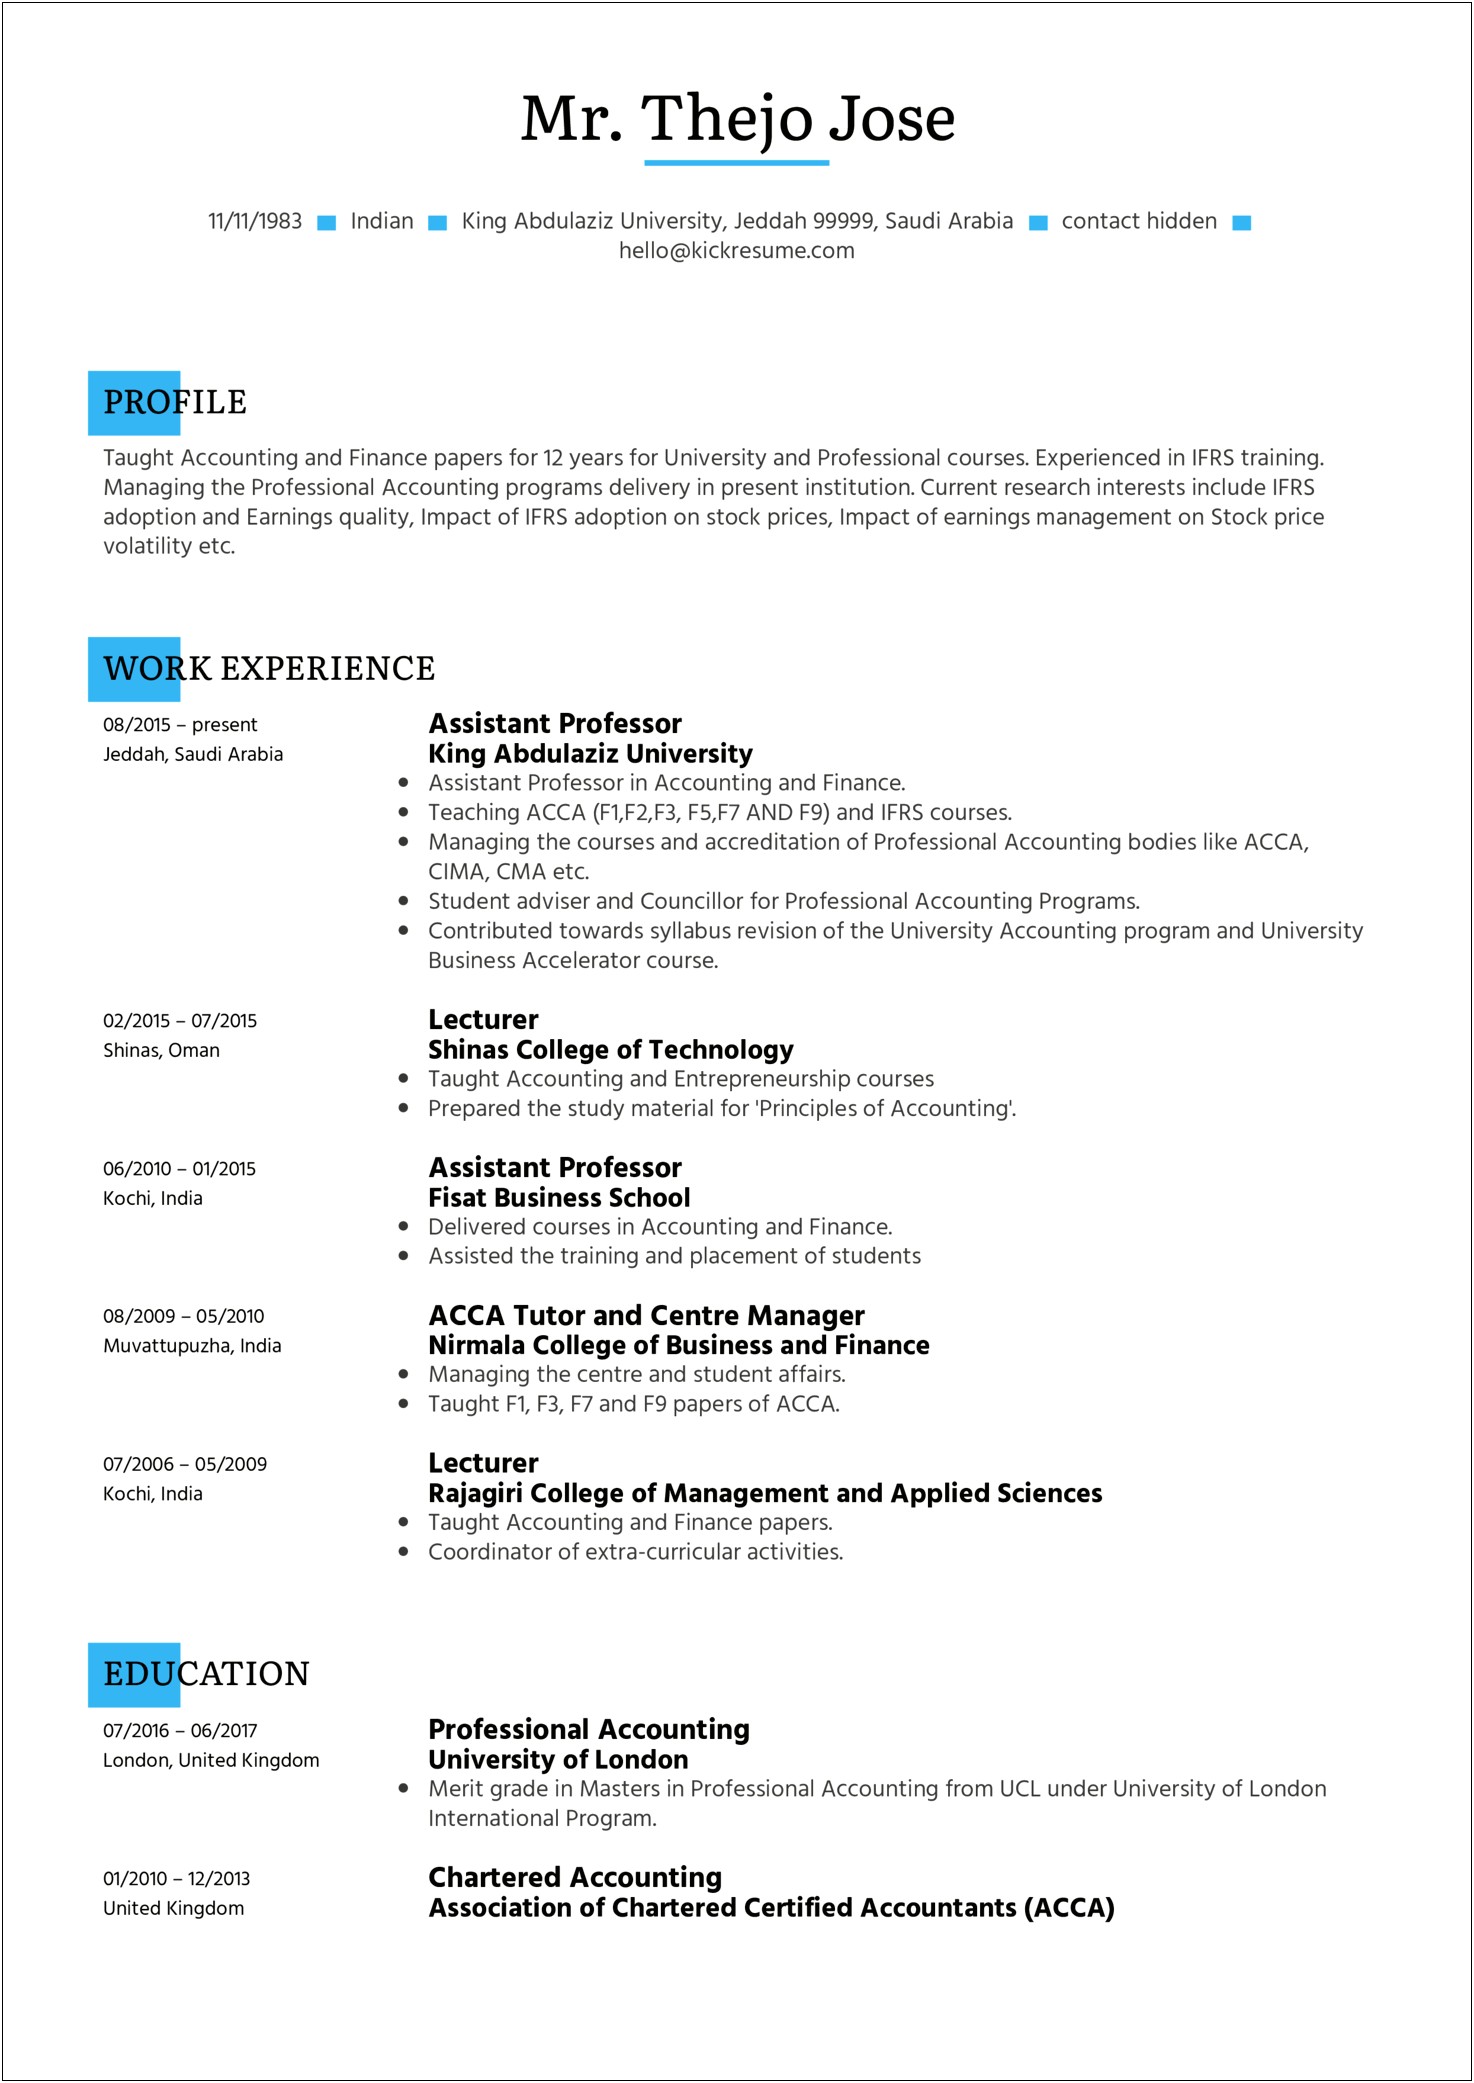 Resume Objectives For College Professors